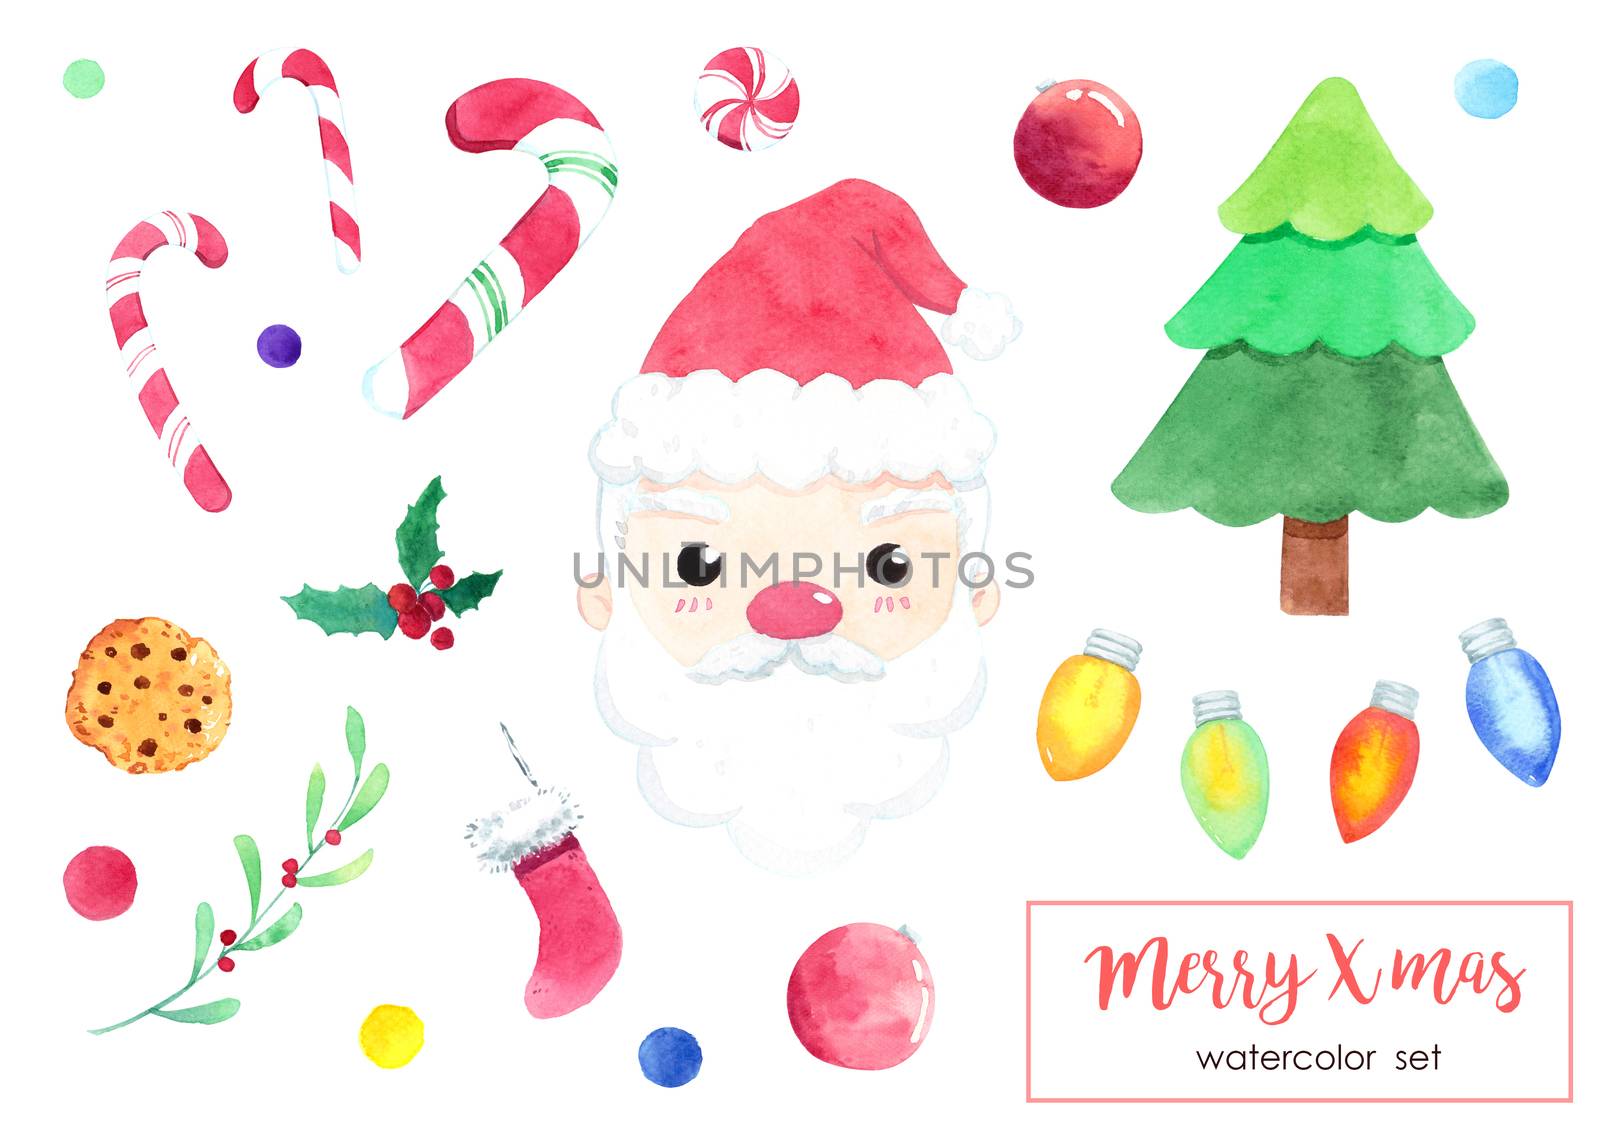 Cute watercolor Christmas objects set: Santa Claus, Fir tree, ball, sweet, sock, holly berry, fairy lights icon. Xmas decorative elements isolated on white background. Hand painted illustrations. Clipping path.